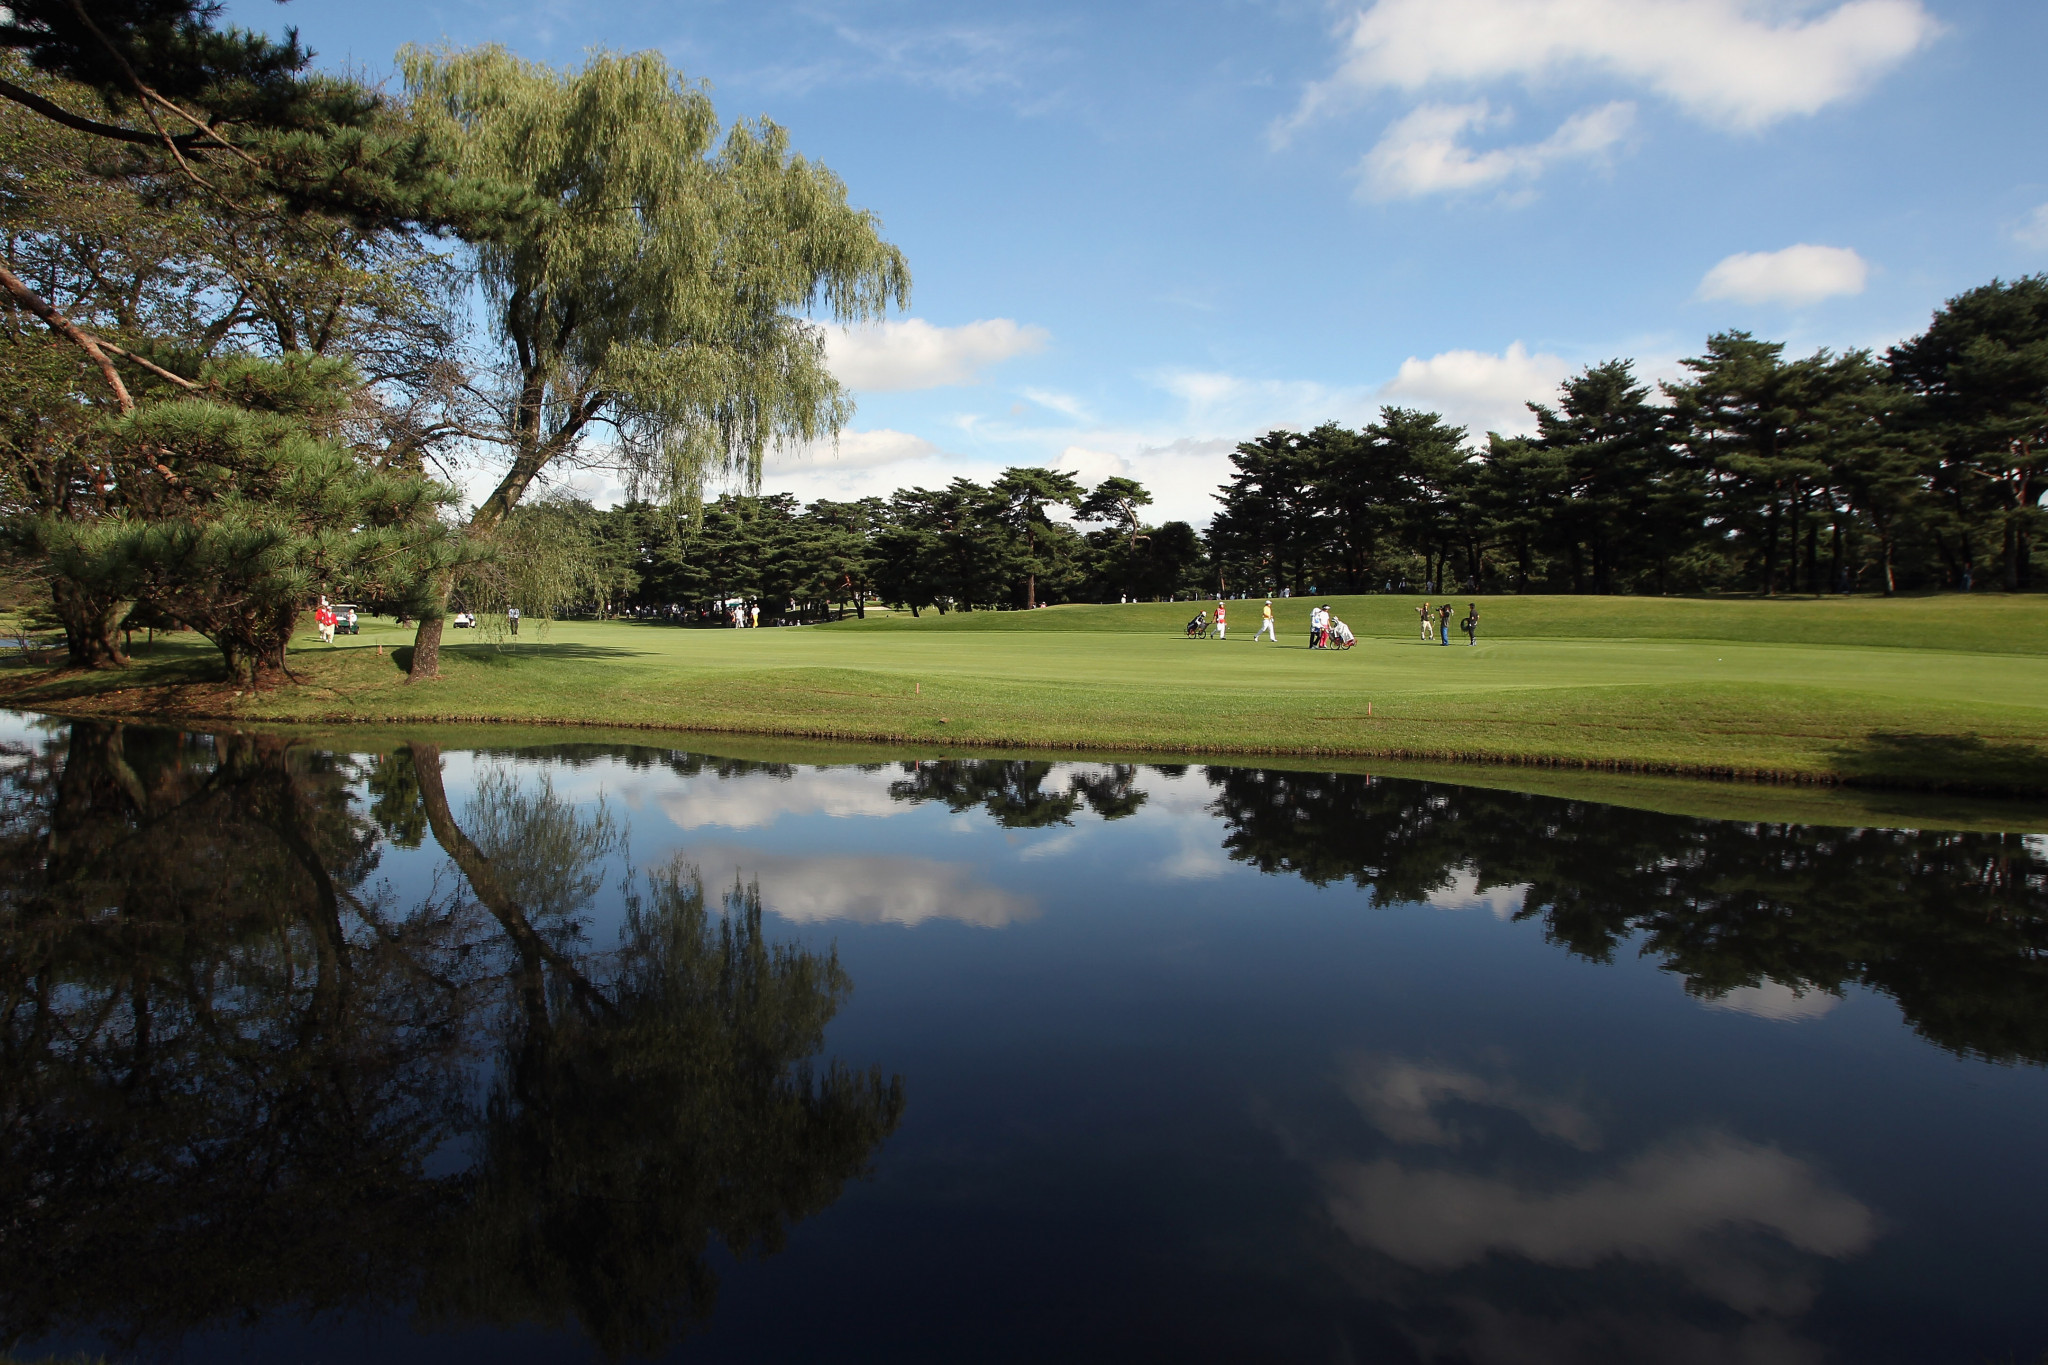 The Kasumigaseki Country Club will be the latest Tokyo 2020 Olympic Games venue to be tested when the Japan Junior Golf Championship takes place this week ©Getty Images